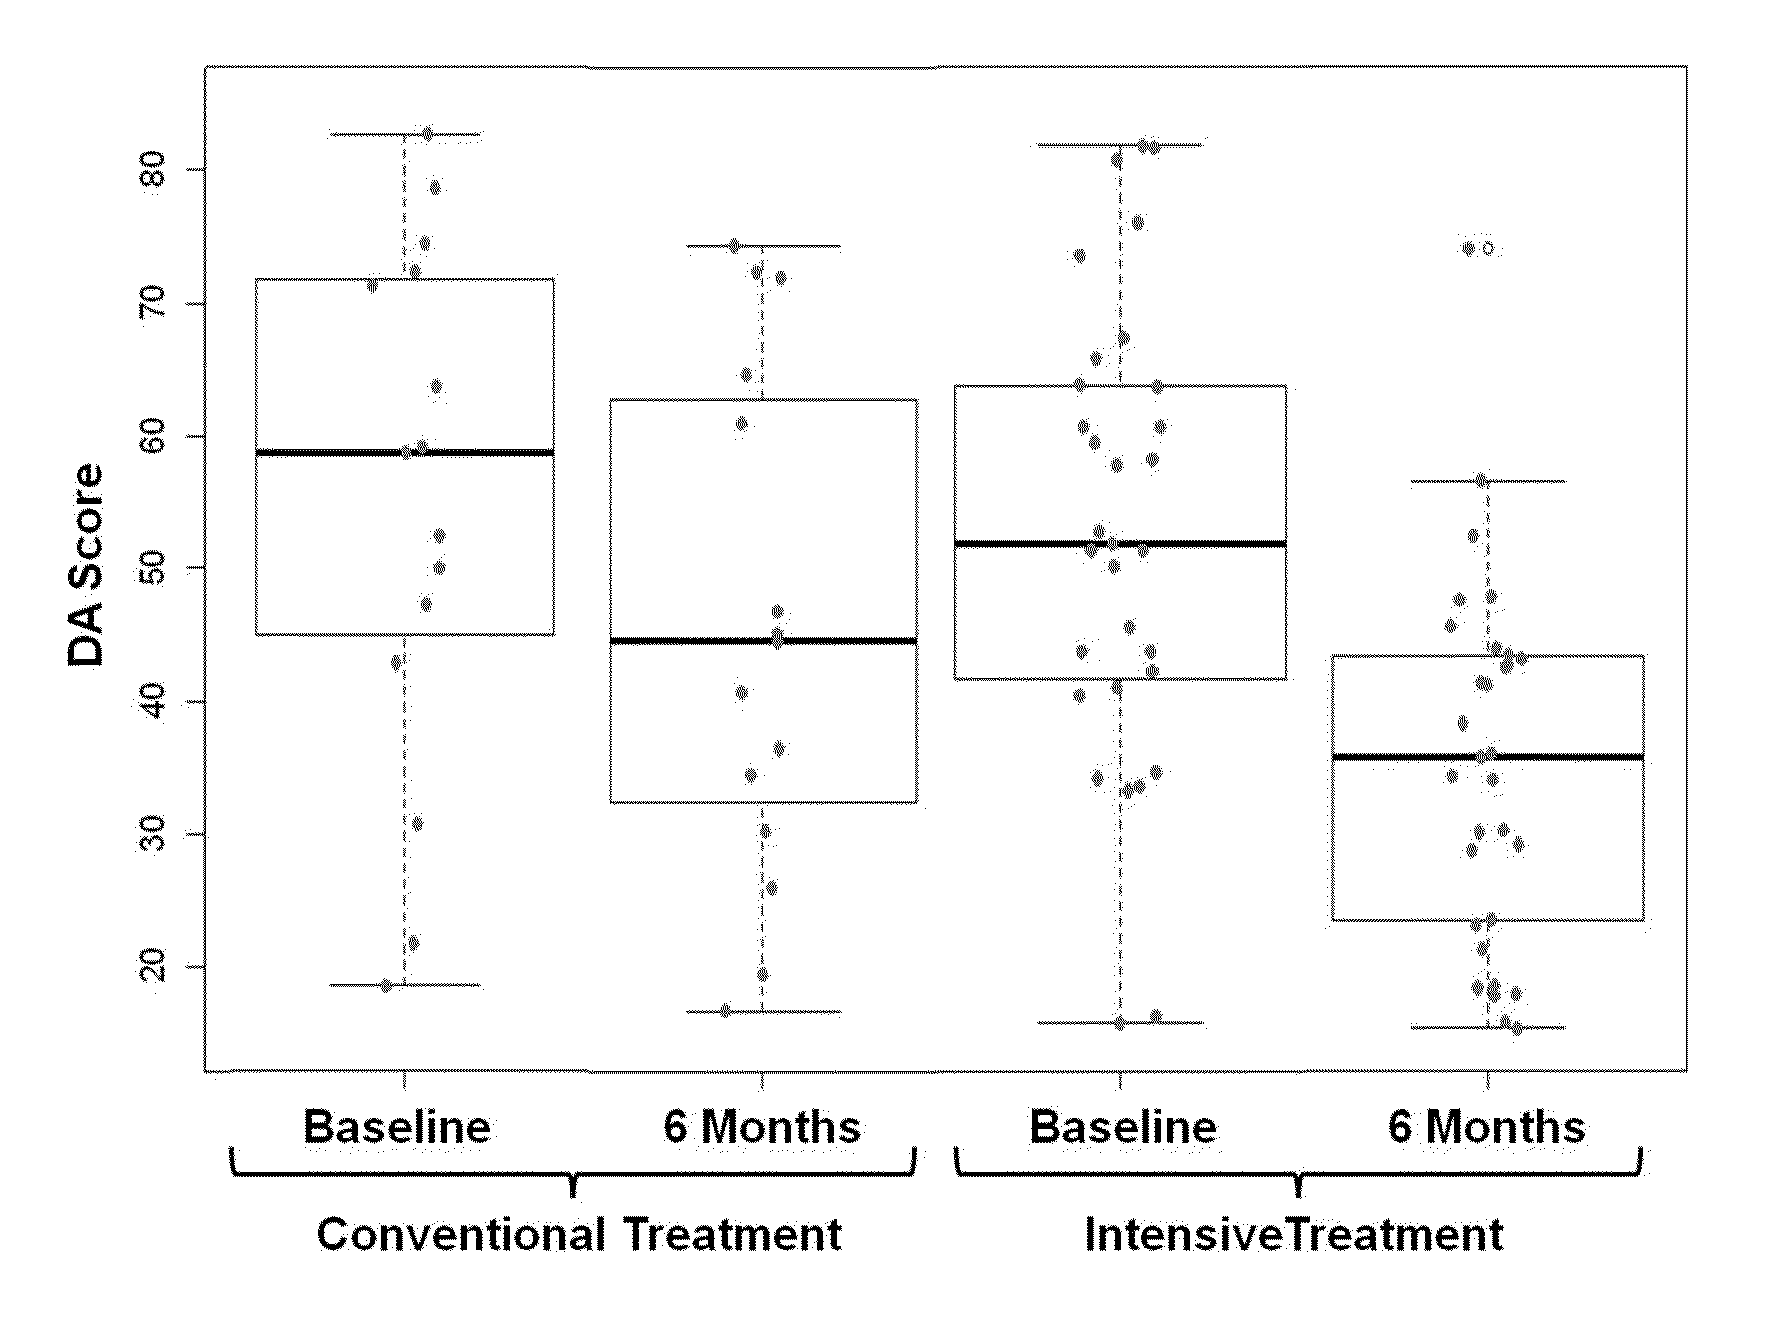 Biomarkers and methods for measuring and monitoring inflammatory disease activity